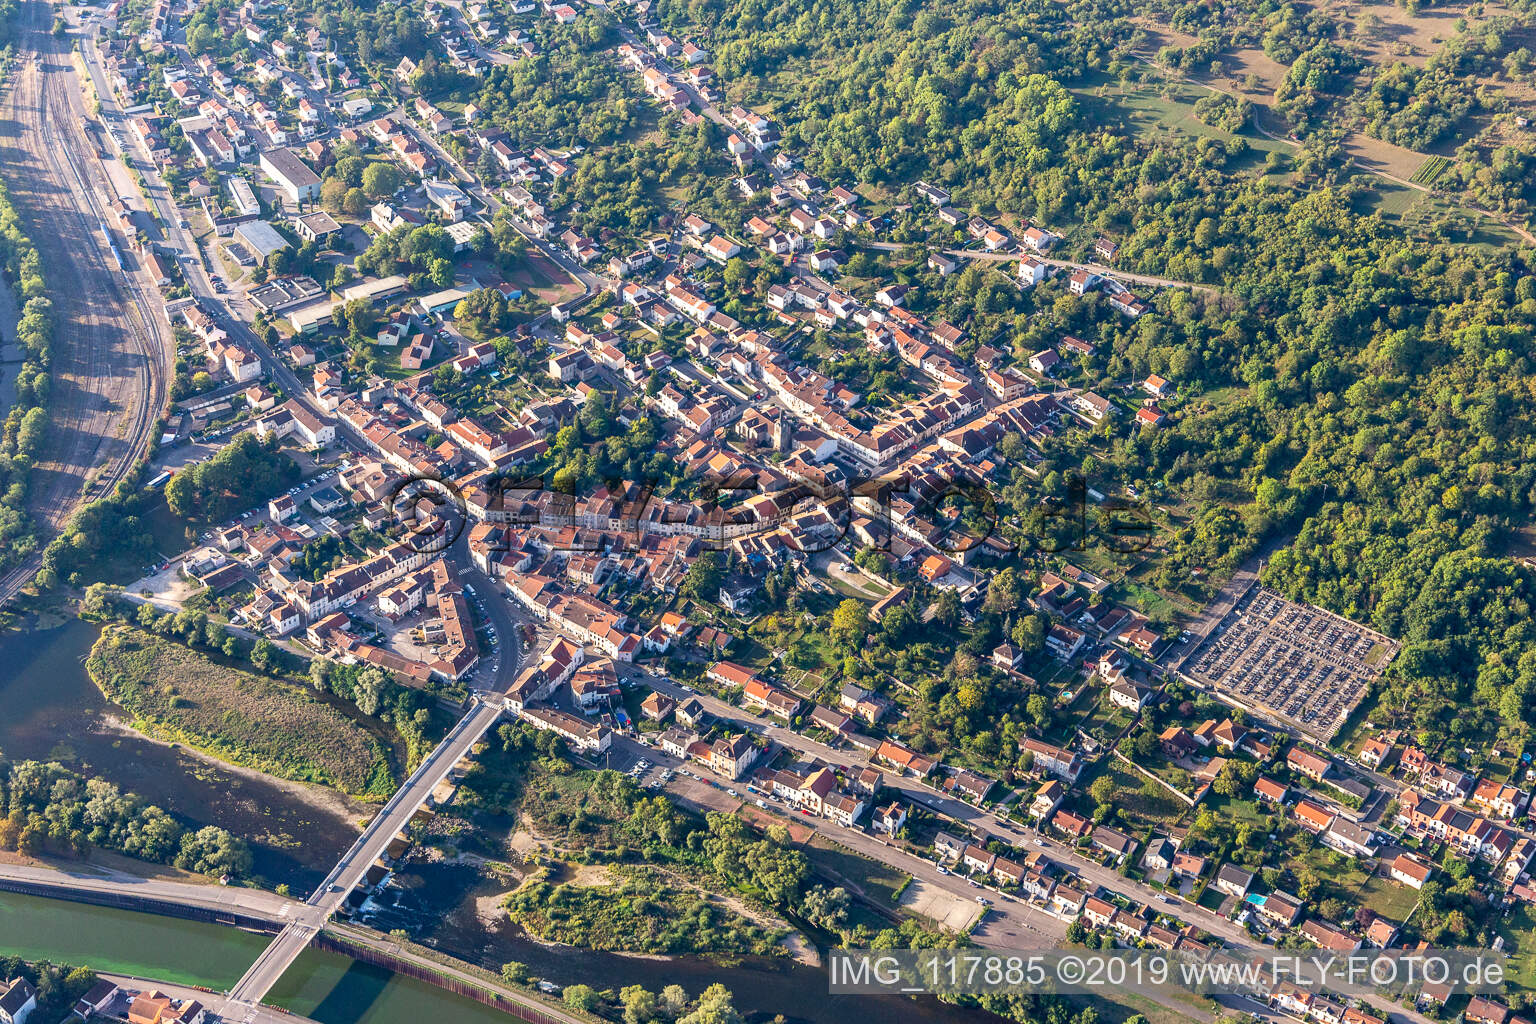 Aerial photograpy of Pont-Saint-Vincent in the state Meurthe et Moselle, France